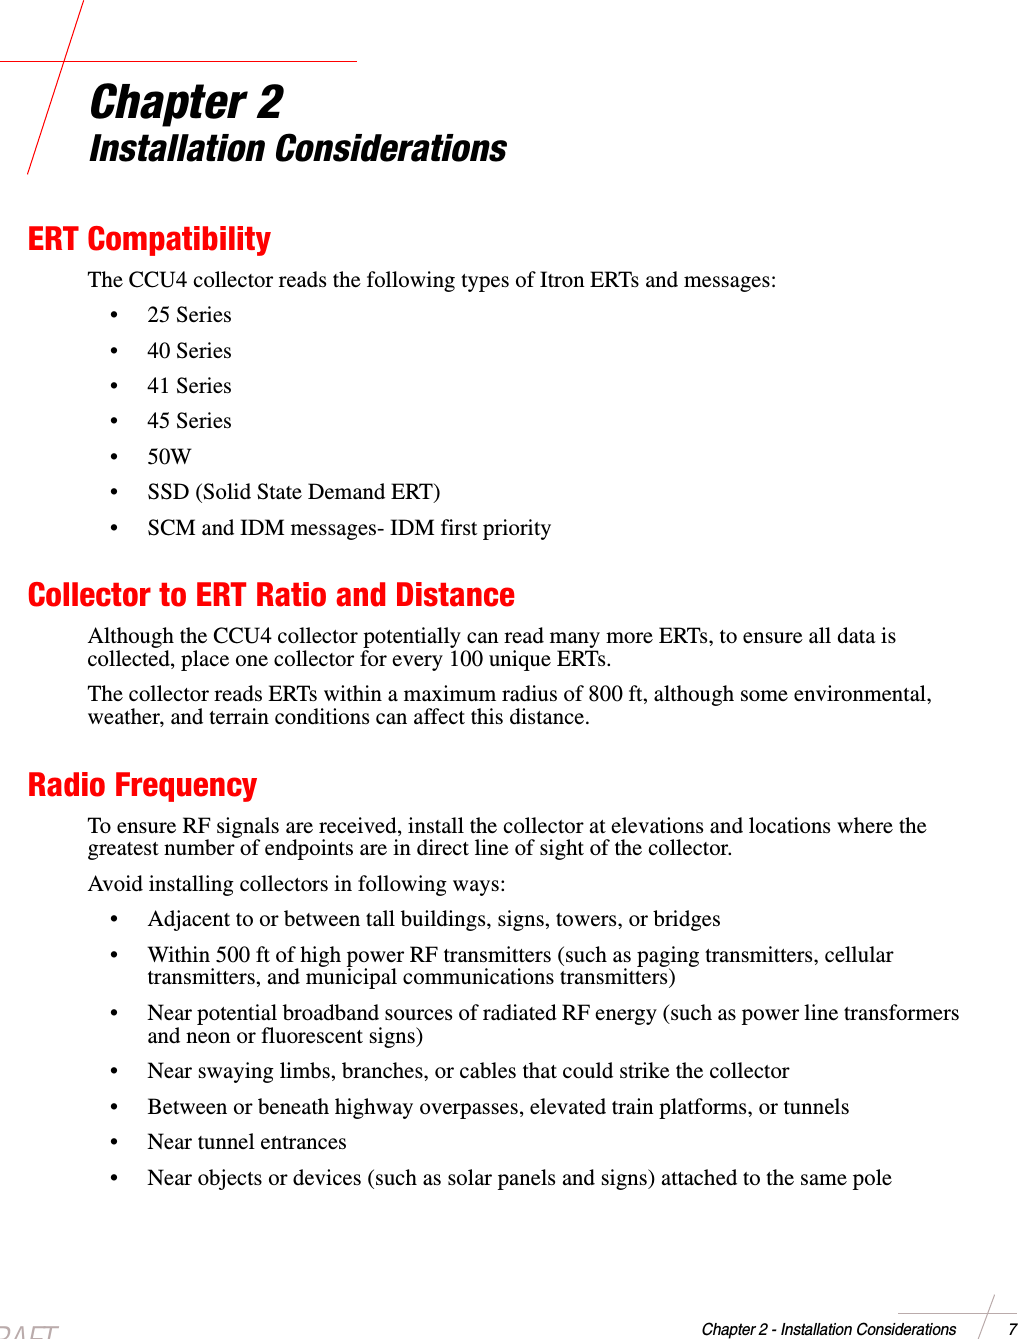 DRAFTChapter 2 - Installation Considerations 7Chapter 2Installation ConsiderationsERT CompatibilityThe CCU4 collector reads the following types of Itron ERTs and messages:•25Series•40Series•41Series•45Series•50W• SSD (Solid State Demand ERT)• SCM and IDM messages- IDM first priorityCollector to ERT Ratio and DistanceAlthough the CCU4 collector potentially can read many more ERTs, to ensure all data iscollected, place one collector for every 100 unique ERTs.The collector reads ERTs within a maximum radius of 800 ft, although some environmental,weather, and terrain conditions can affect this distance.Radio FrequencyTo ensure RF signals are received, install the collector at elevations and locations where thegreatest number of endpoints are in direct line of sight of the collector.Avoid installing collectors in following ways:• Adjacent to or between tall buildings, signs, towers, or bridges• Within 500 ft of high power RF transmitters (such as paging transmitters, cellulartransmitters, and municipal communications transmitters)• Near potential broadband sources of radiated RF energy (such as power line transformersand neon or fluorescent signs)• Near swaying limbs, branches, or cables that could strike the collector• Between or beneath highway overpasses, elevated train platforms, or tunnels• Near tunnel entrances• Near objects or devices (such as solar panels and signs) attached to the same pole